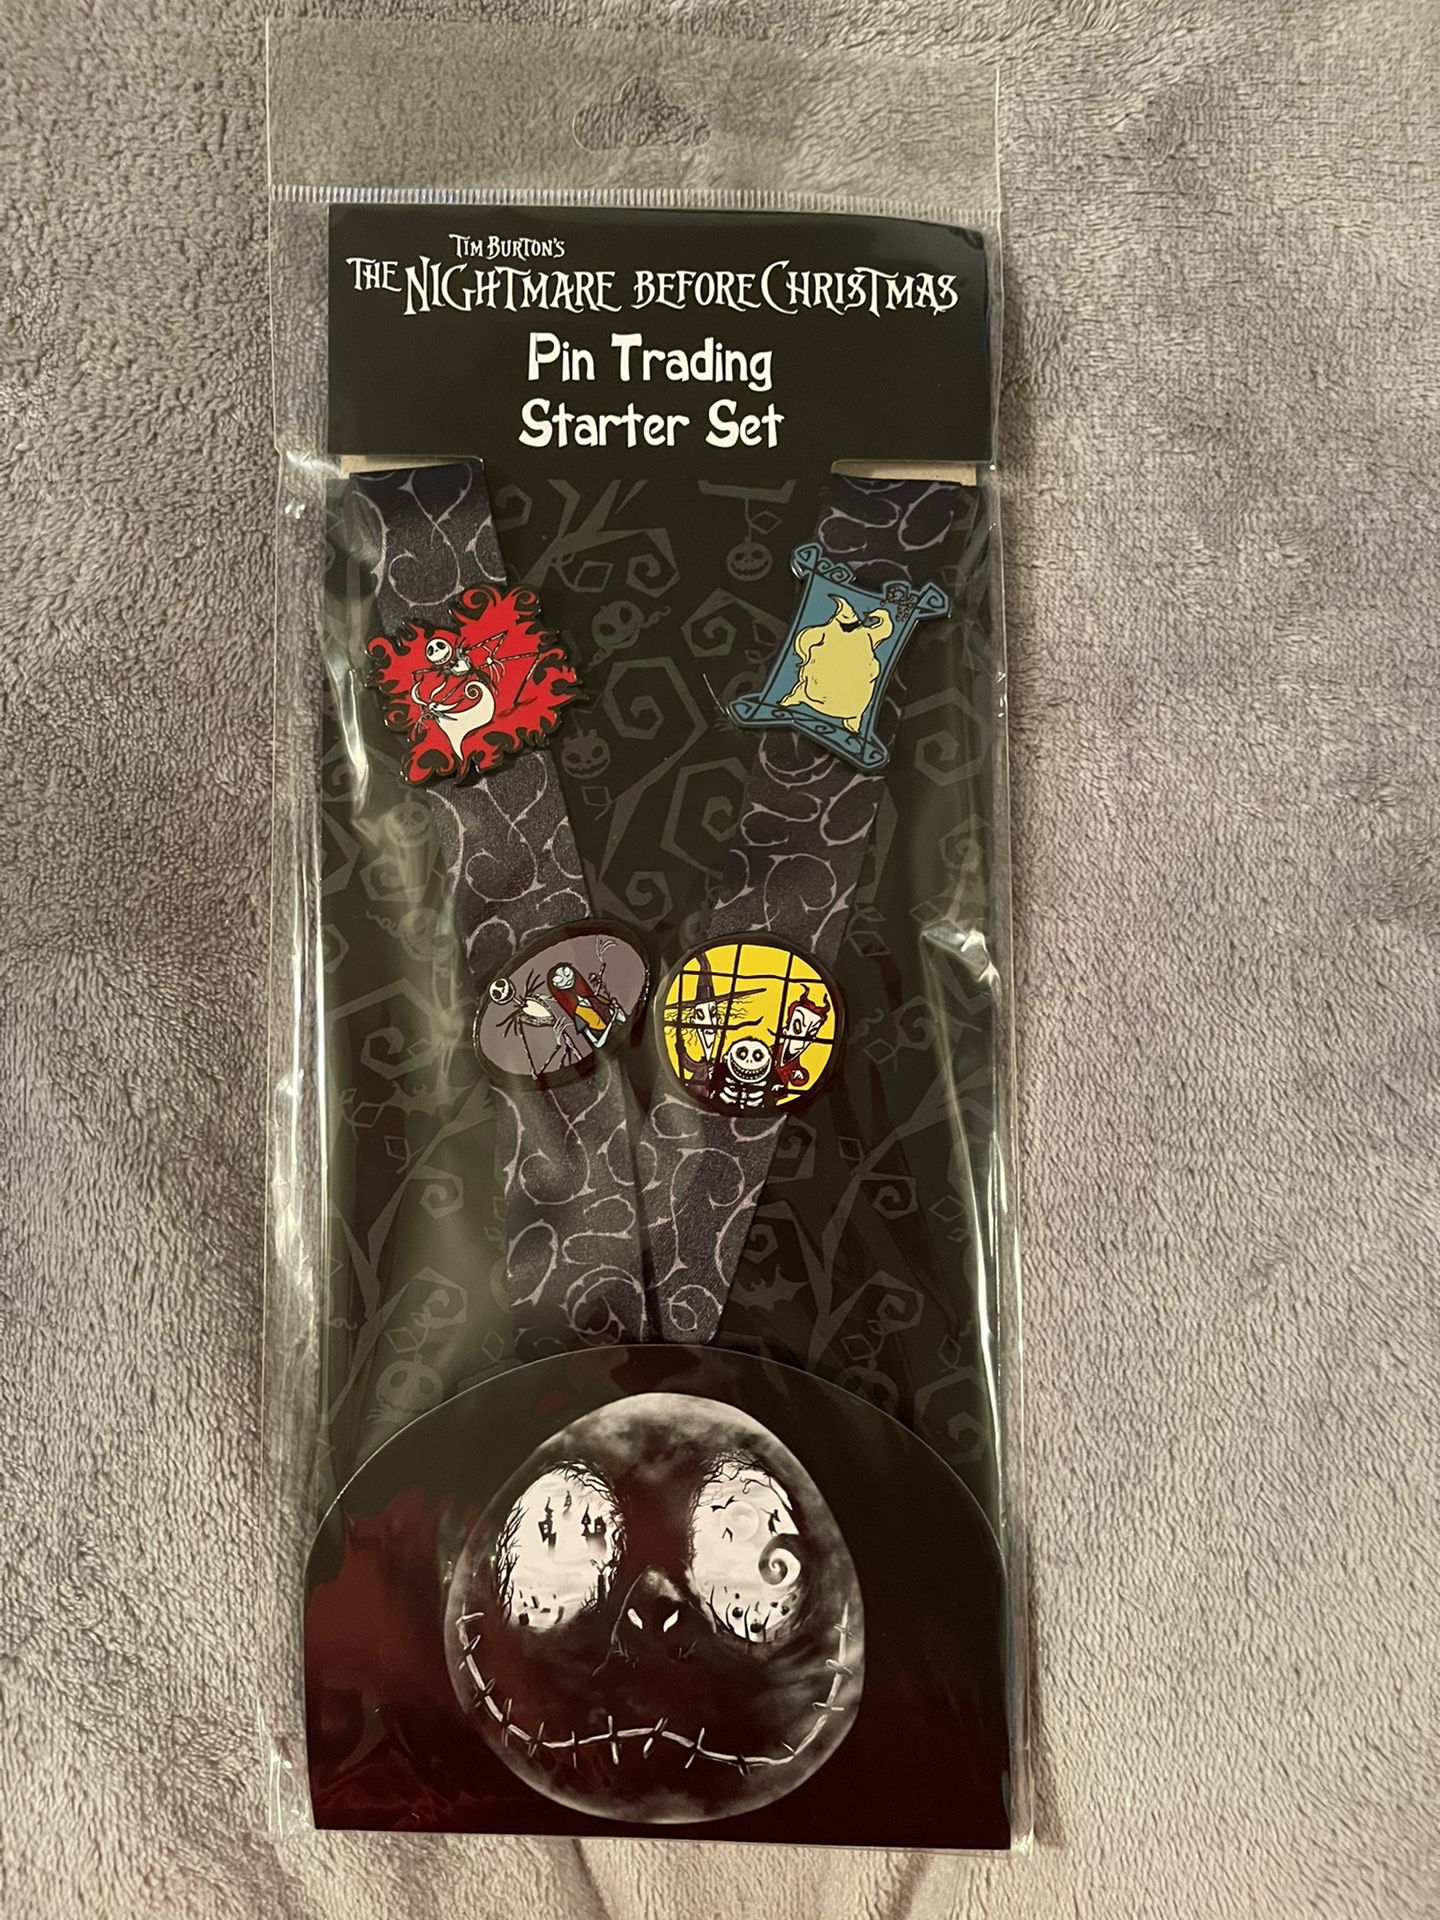 The Nightmare Before Christmas pin trading set